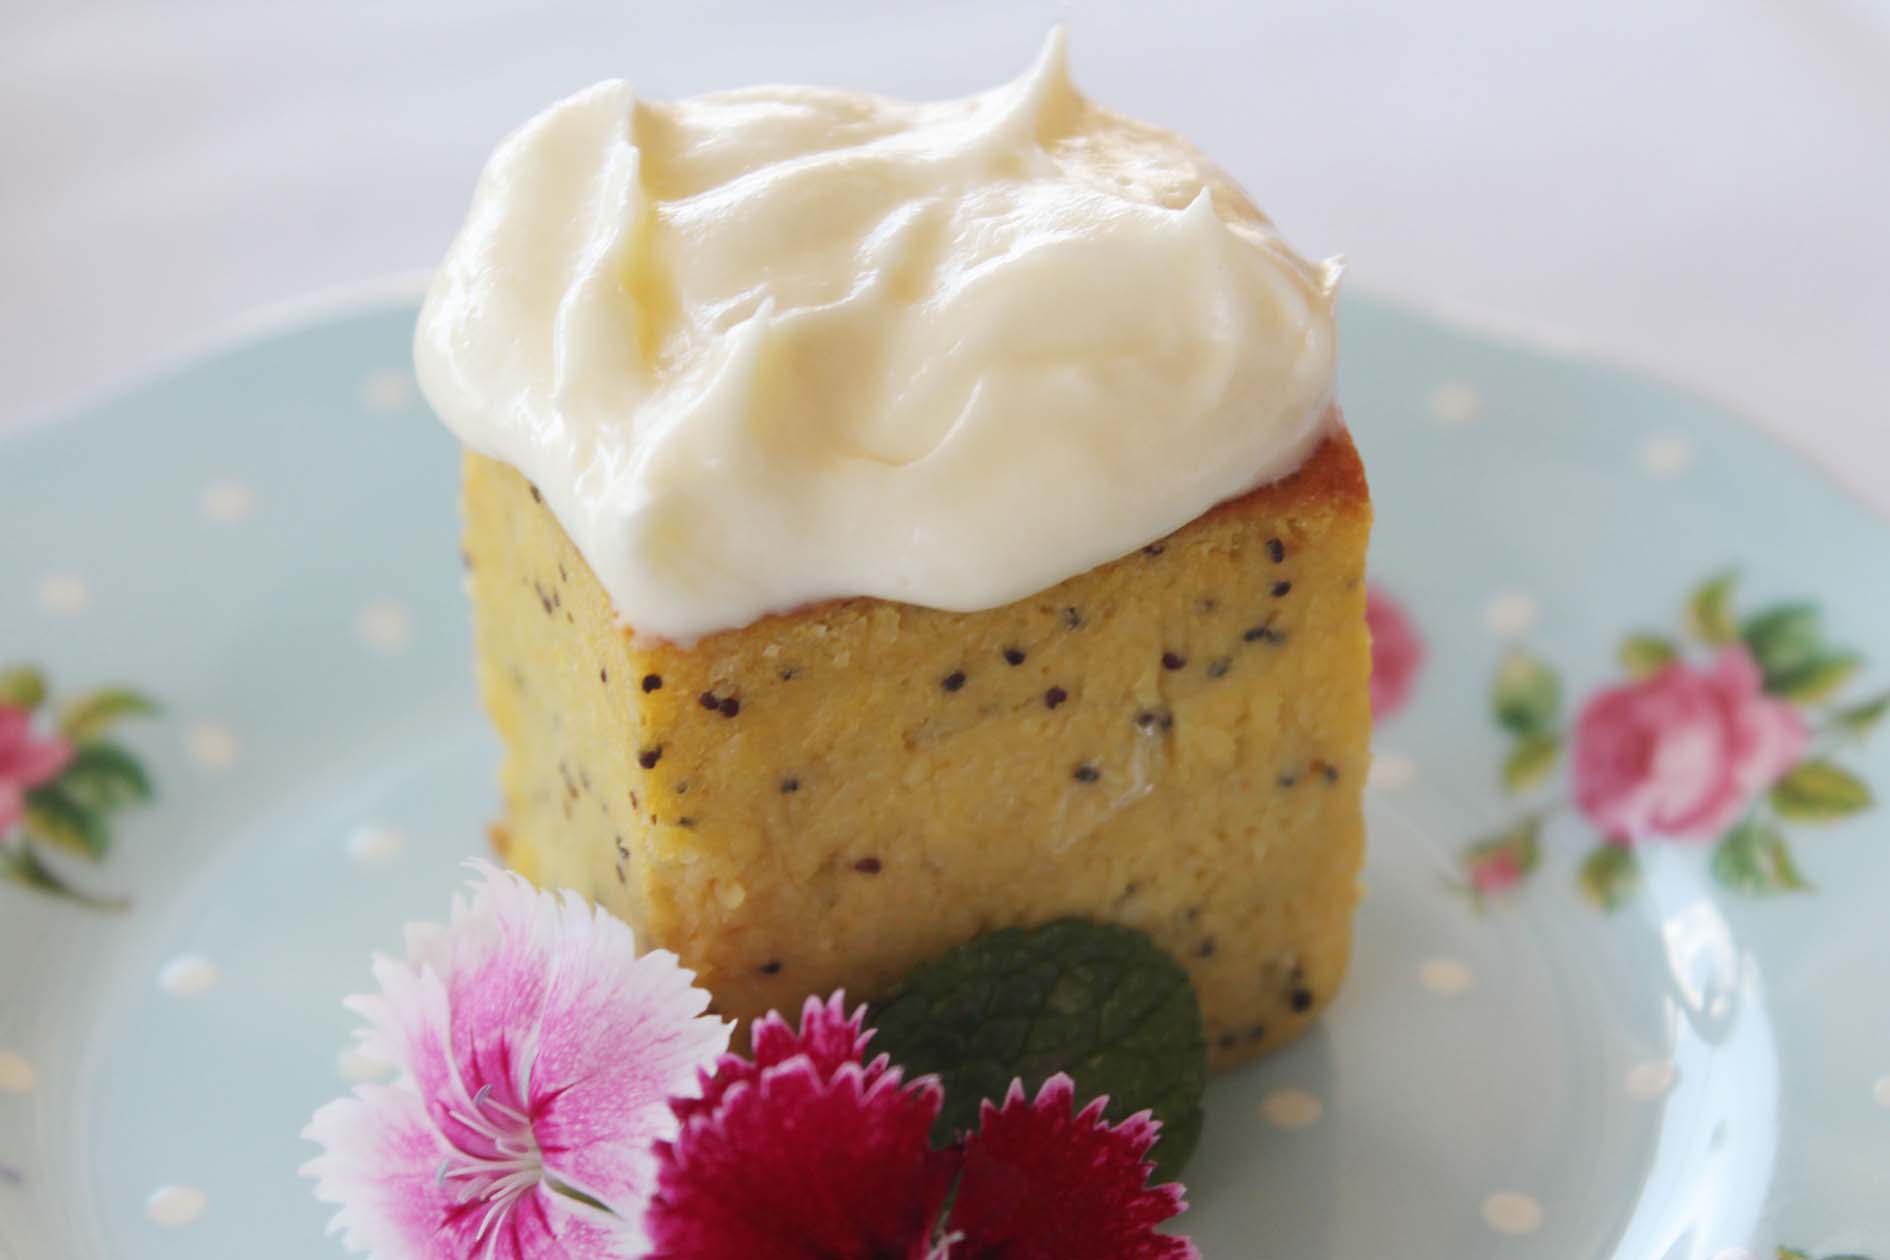 The Cottage poppy seed cake